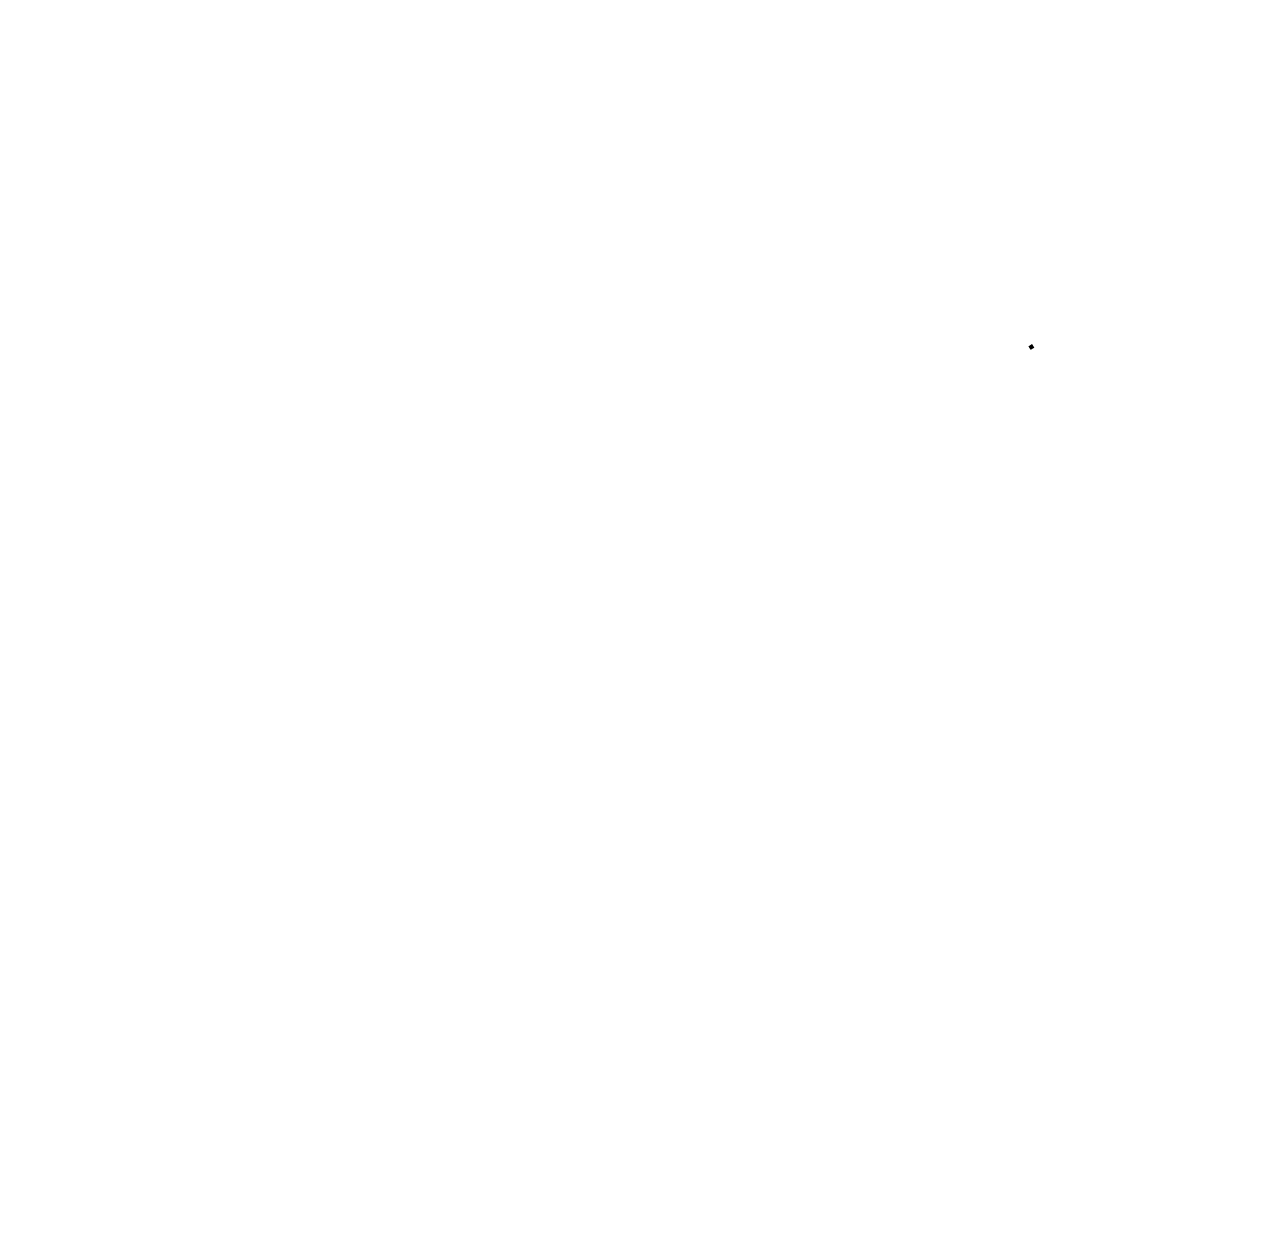 Foster Point Capital